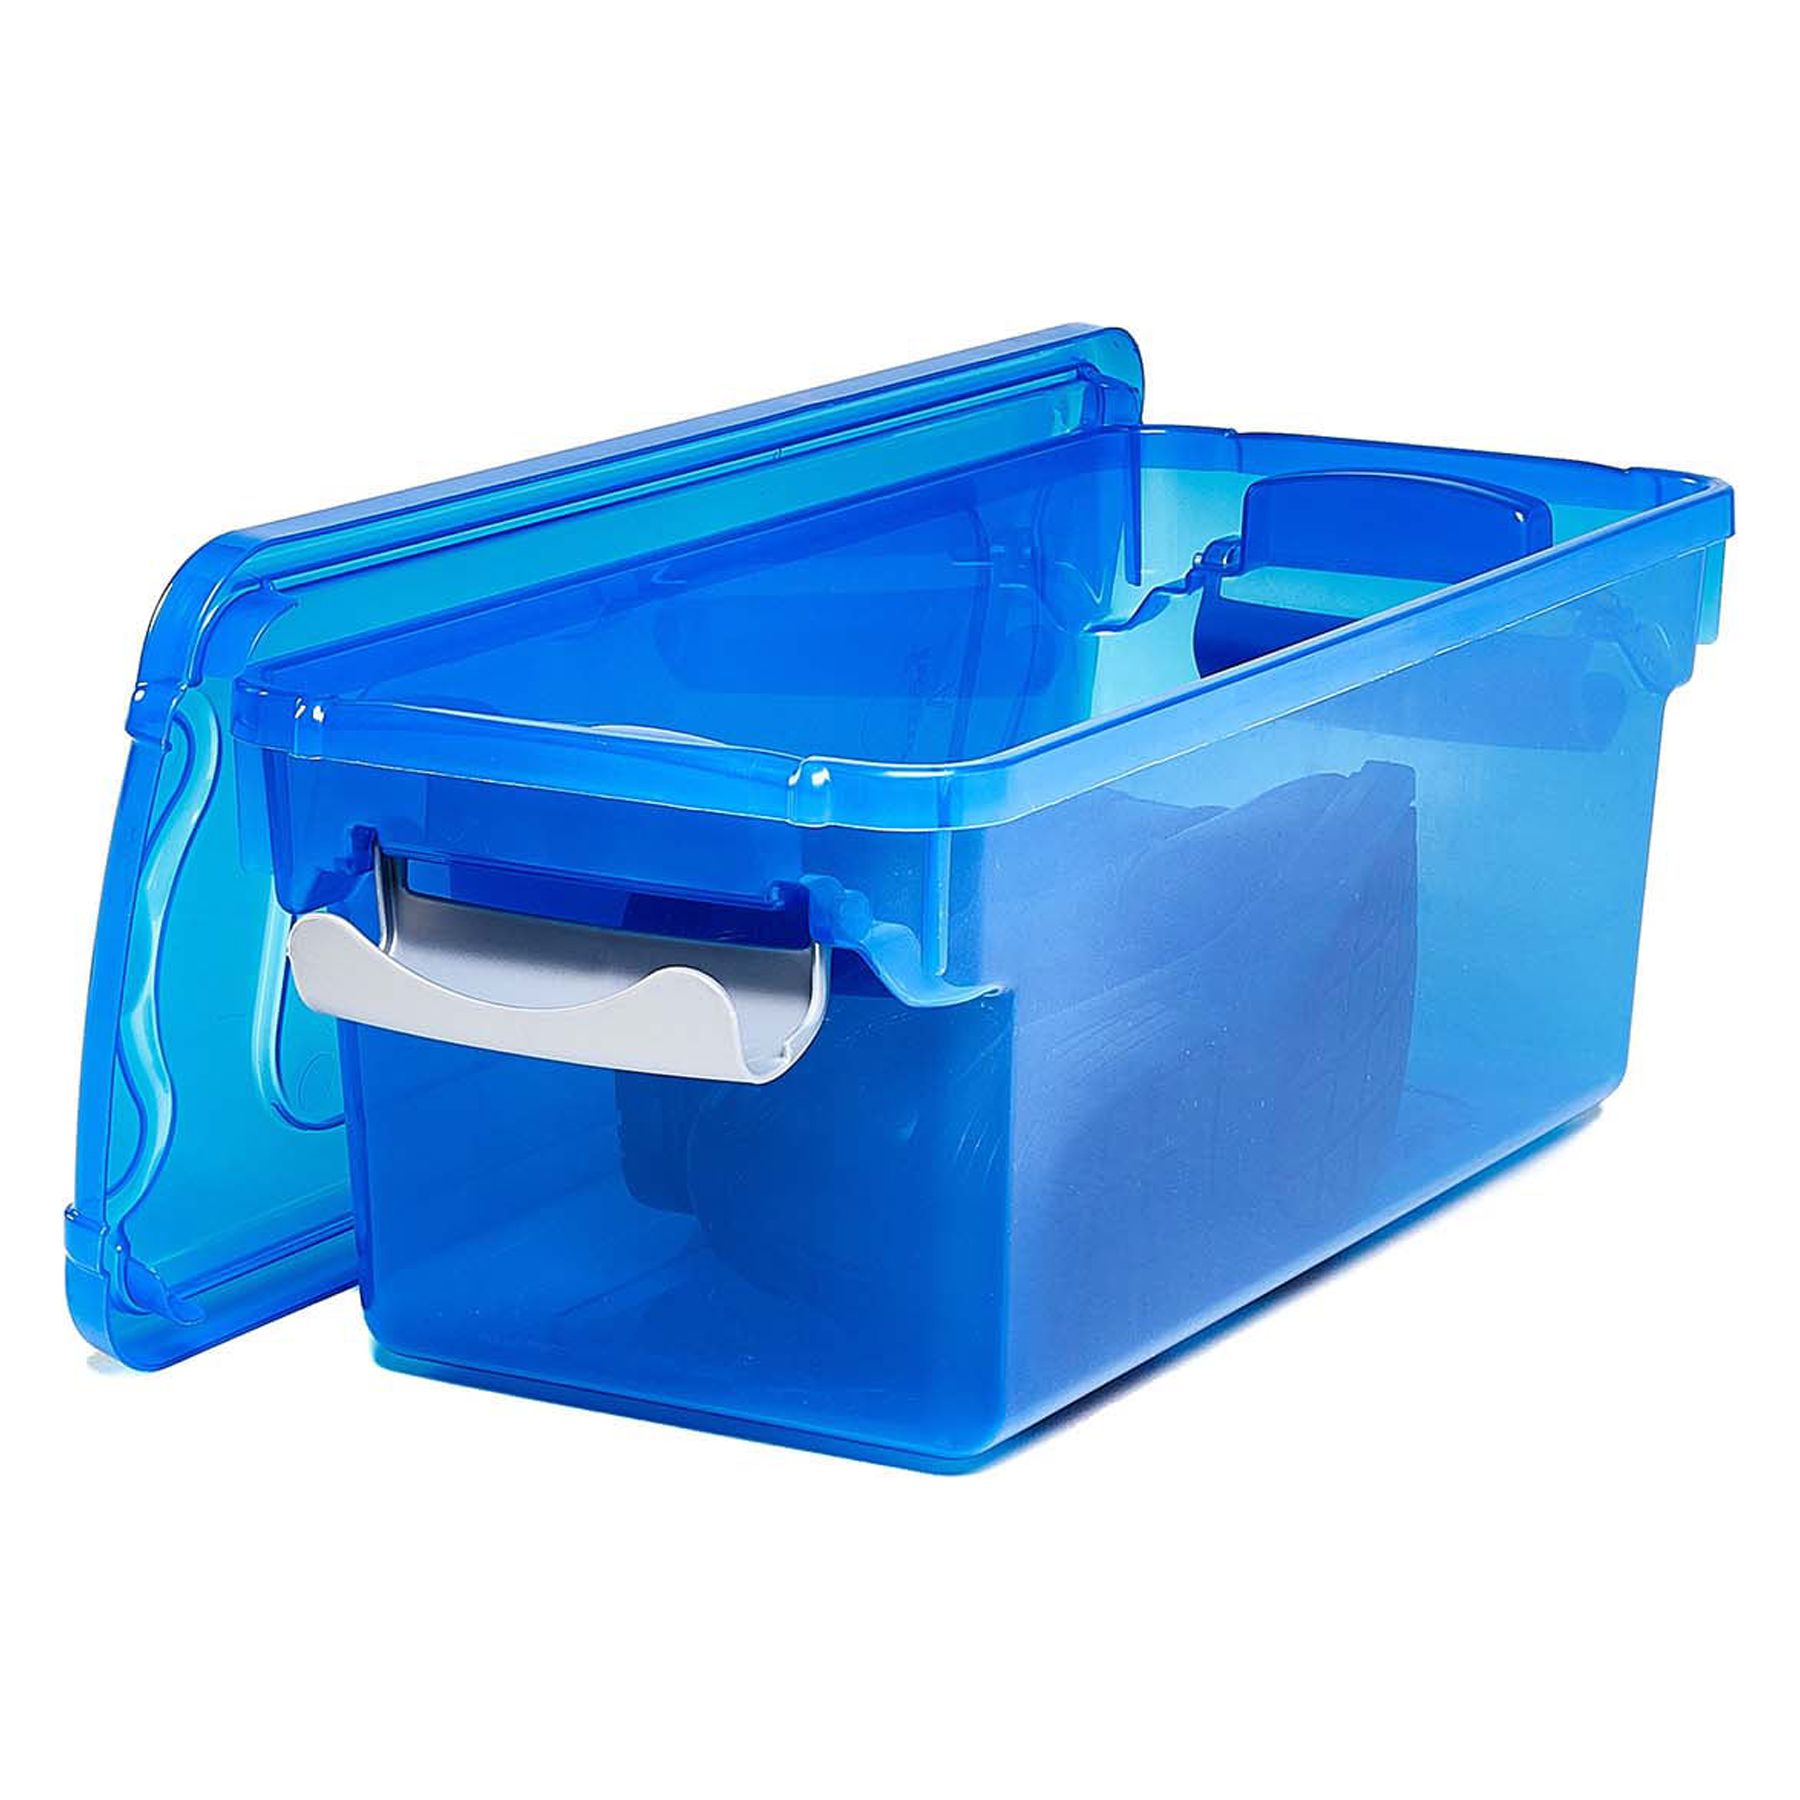 Homz 1.8 Gallon Plastic Storage Container, Blue and Clear - image 5 of 5